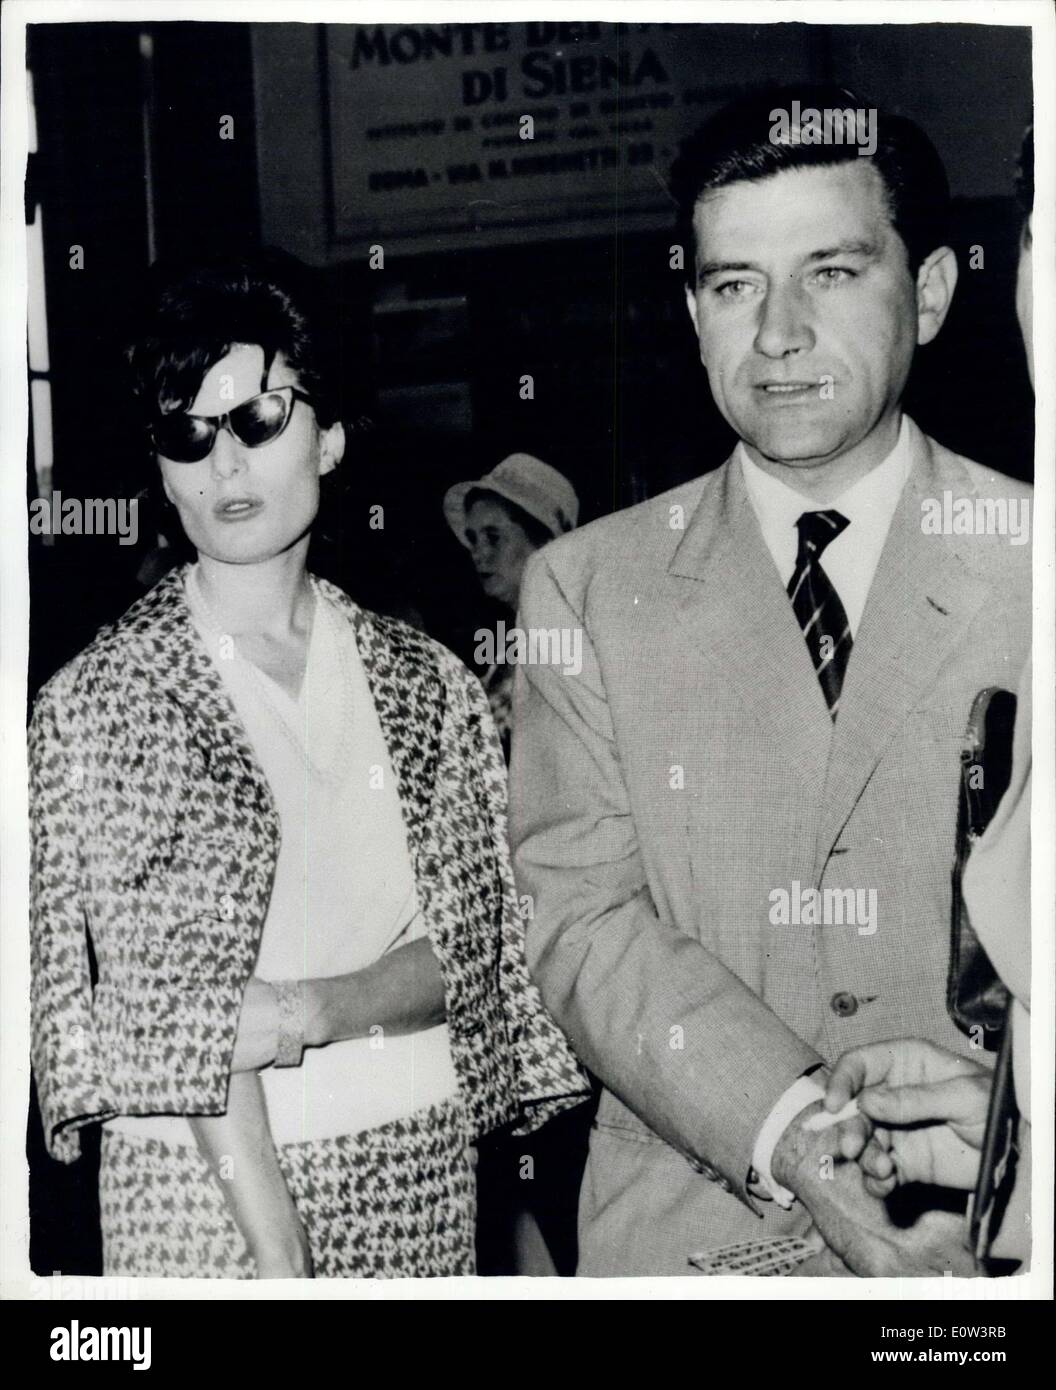 Mar. 14, 1961 - Britain's Belinda Lee - Killed in Car Crash.. Her Fiance -Gualtiero Jacopetti is Injured:British screen star Belinda Lee (26) was killed last night in a 100 m.p.h car crash on the desert highway between Las Vegas and Los Angeles. The Station wagon in which she and three Italian film men were riding - blew a rear tyre - plunged into a ditch and cart wheeled into the desert. Belinda Lee was trhown 63ft. from the car and she died in the arms of a Highway patrolman fifteen minutes after the crash. The three Italians were taken to hospital suffering from injuries Stock Photo